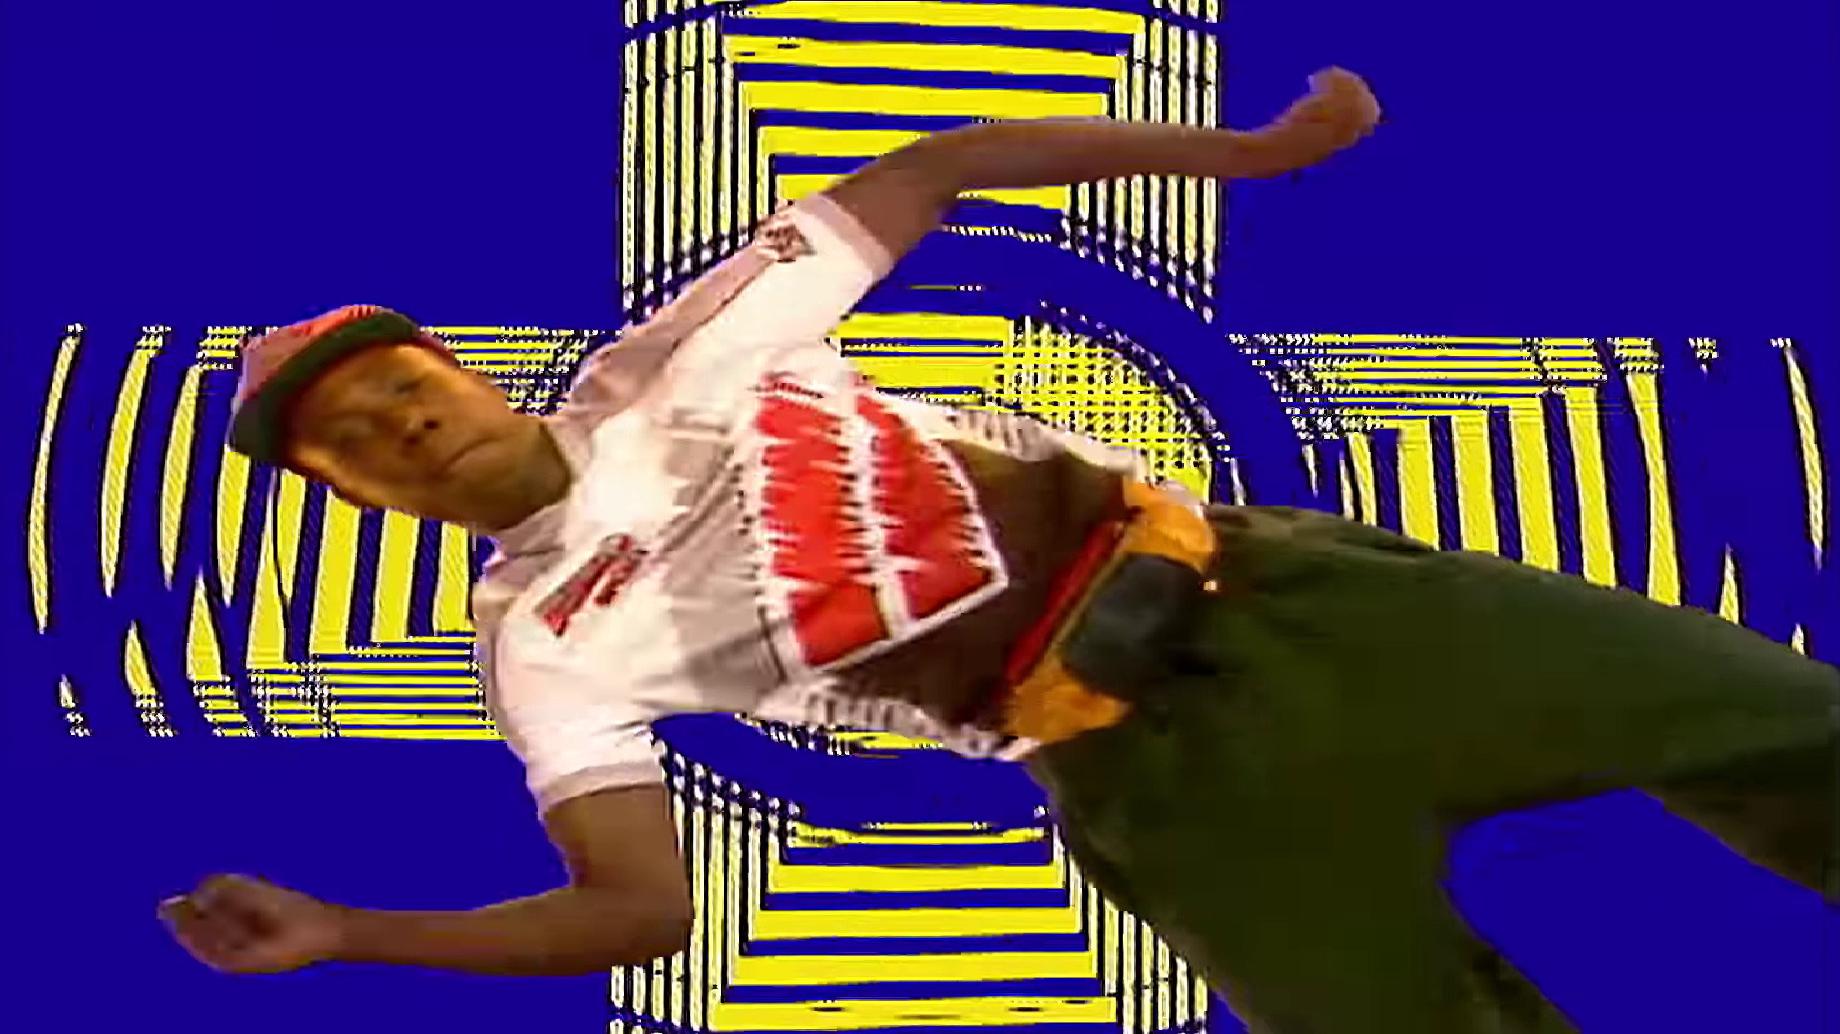 Man dancing on a blue and yellow background.